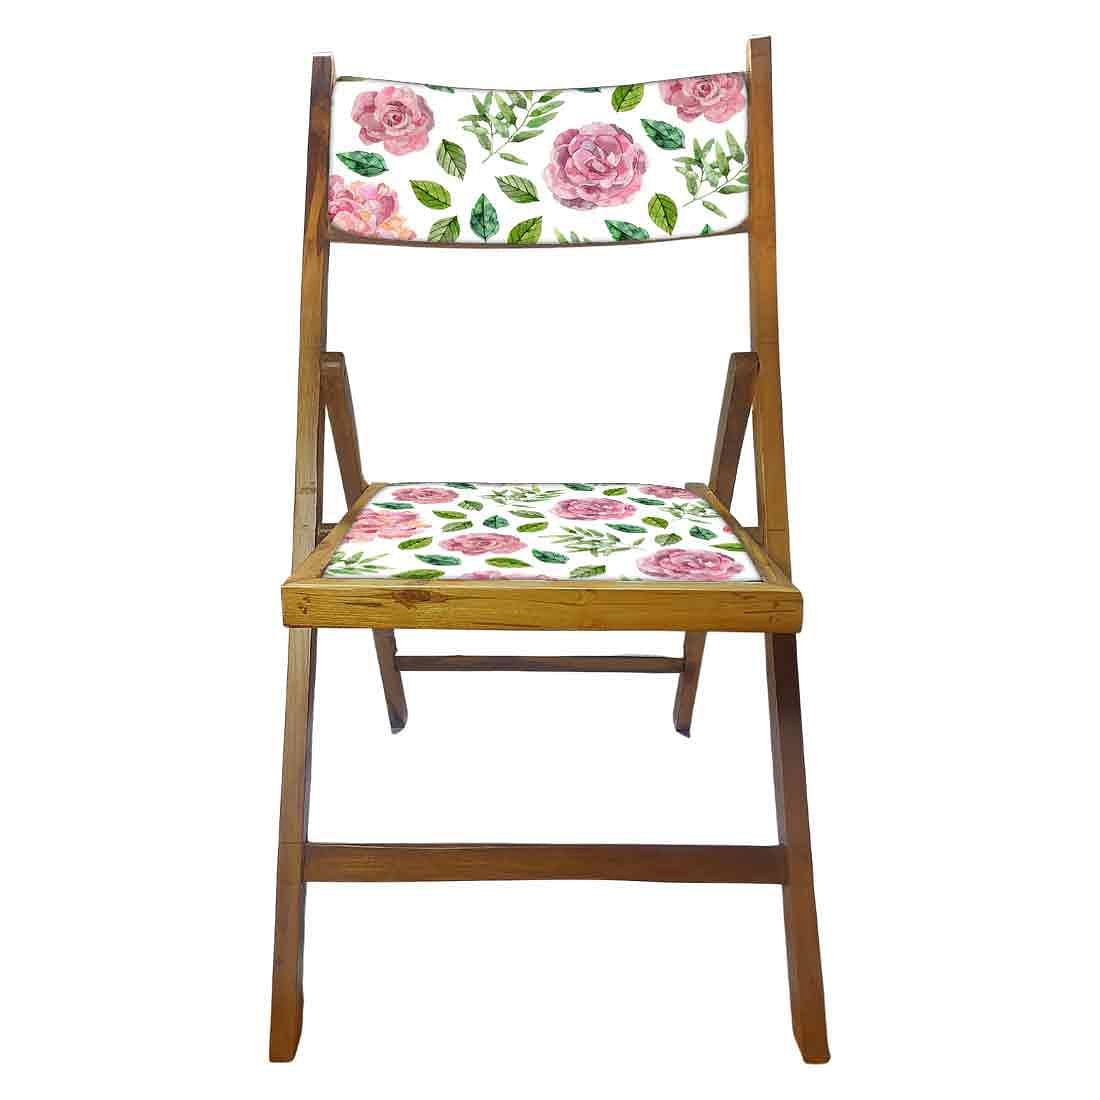 Nutcase Foldable Wooden Chairs With Cushion Seat - Pink Floral Leaves Nutcase